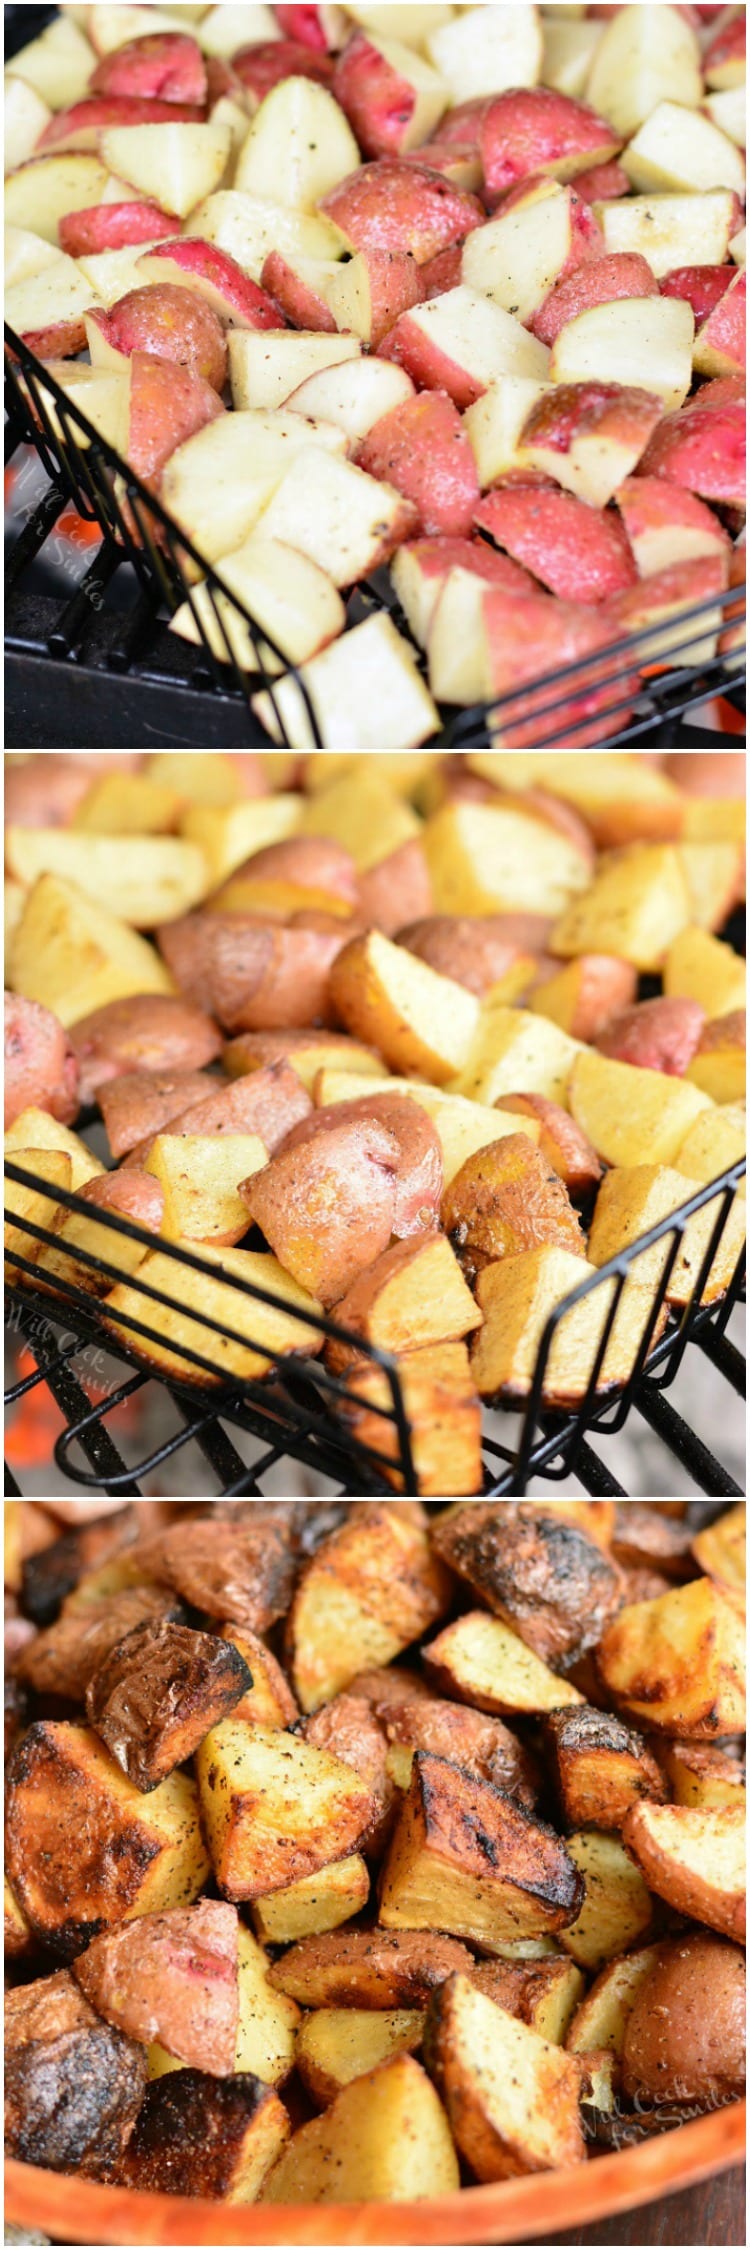 Roasted Garlic Potatoes in a grilling basket on the grill collage 